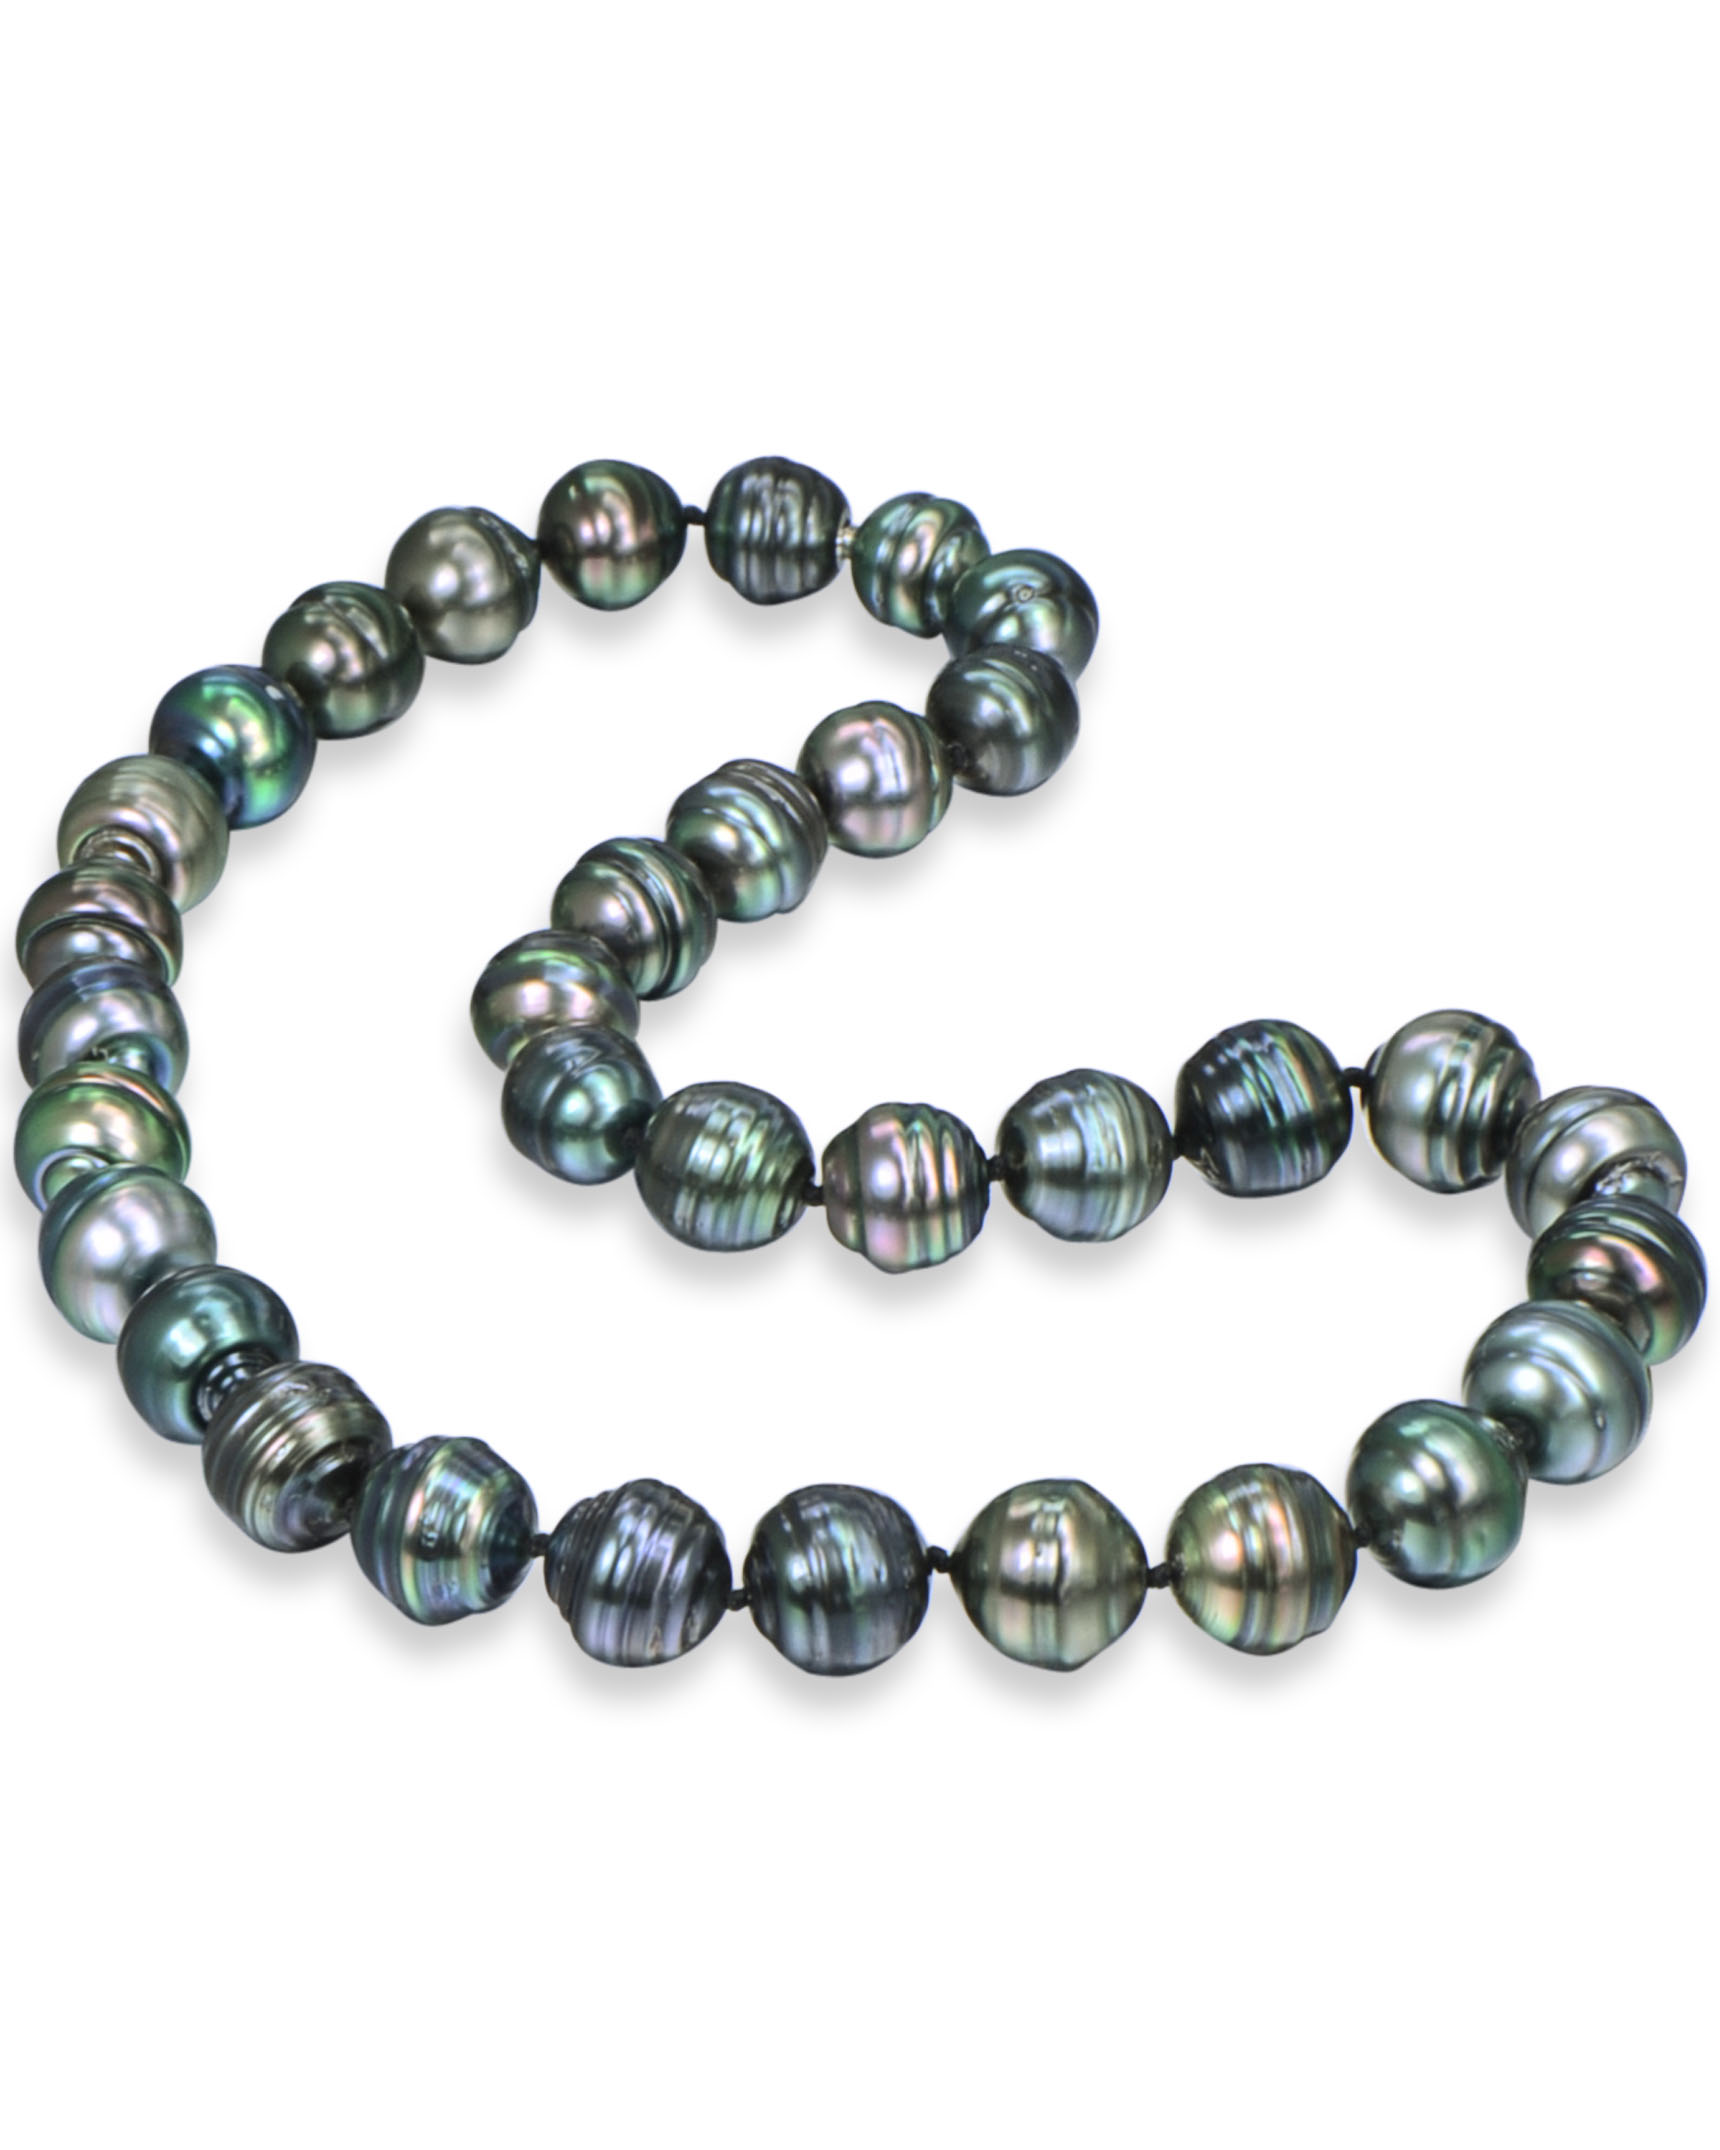 MULTI COLORED BAROQUE TAHITIAN PEARL NECKLACE – Siebke Hoyt